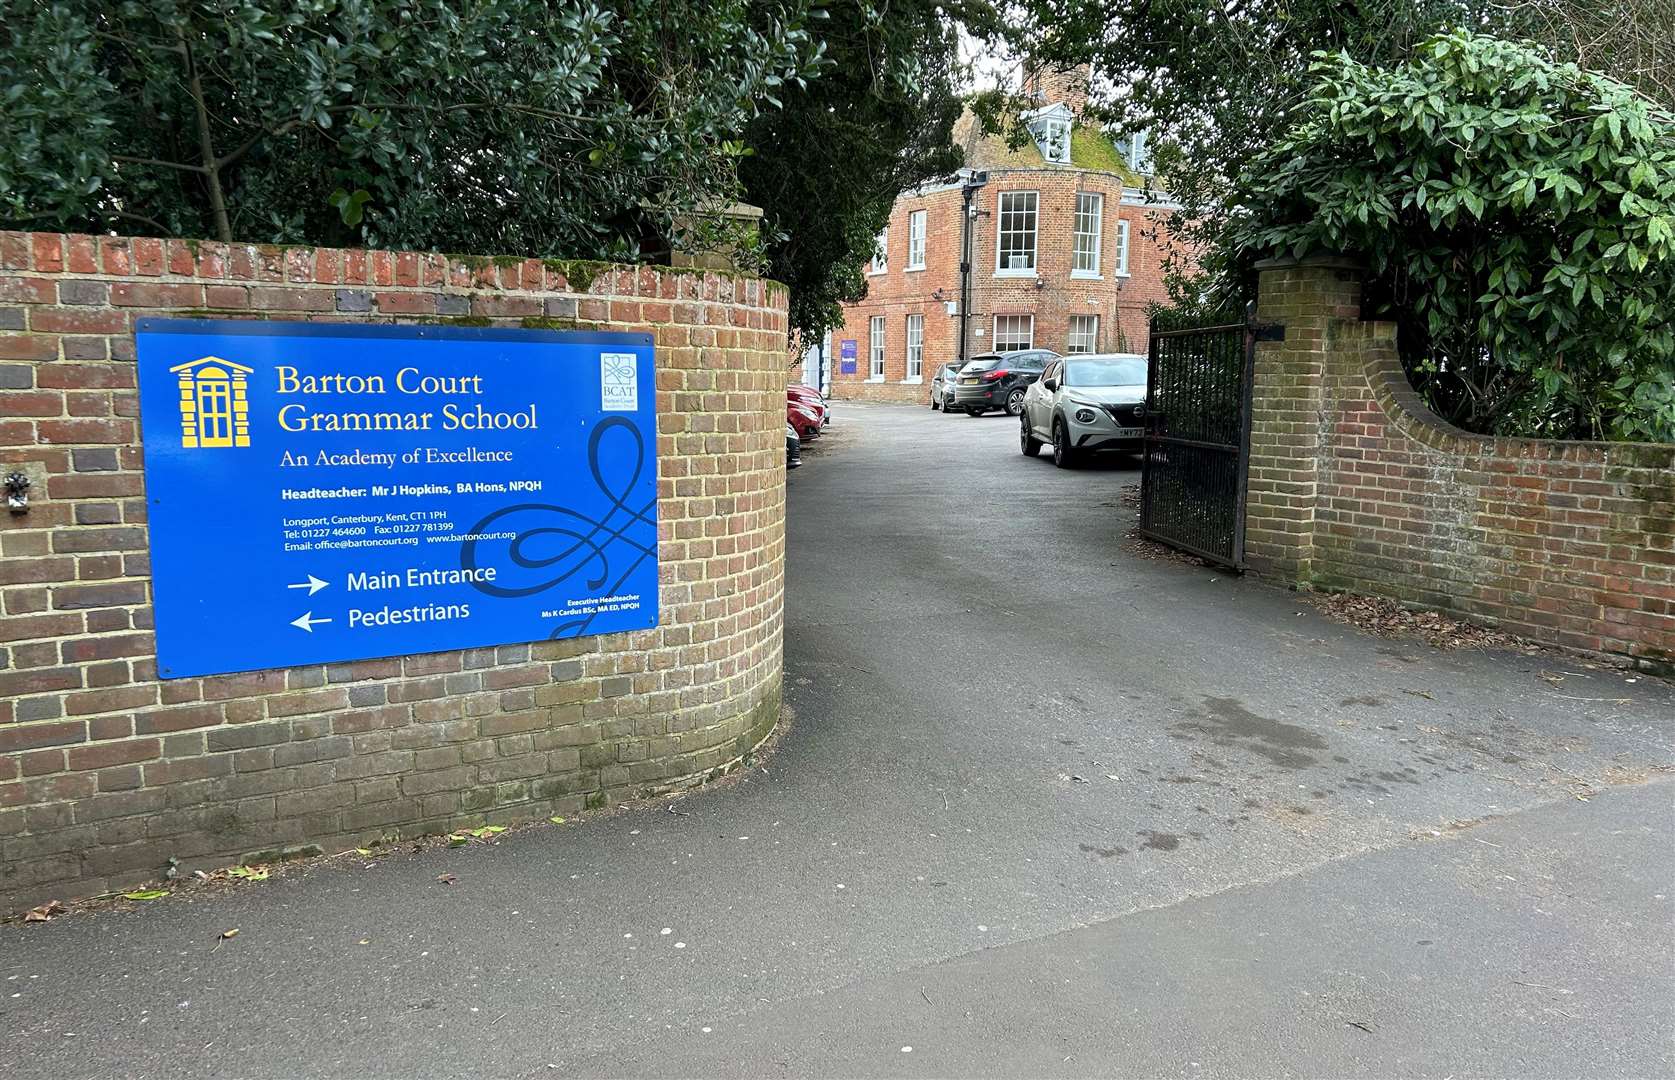 Barton Court Grammar School in Canterbury has told parents to discuss personal safety with their children